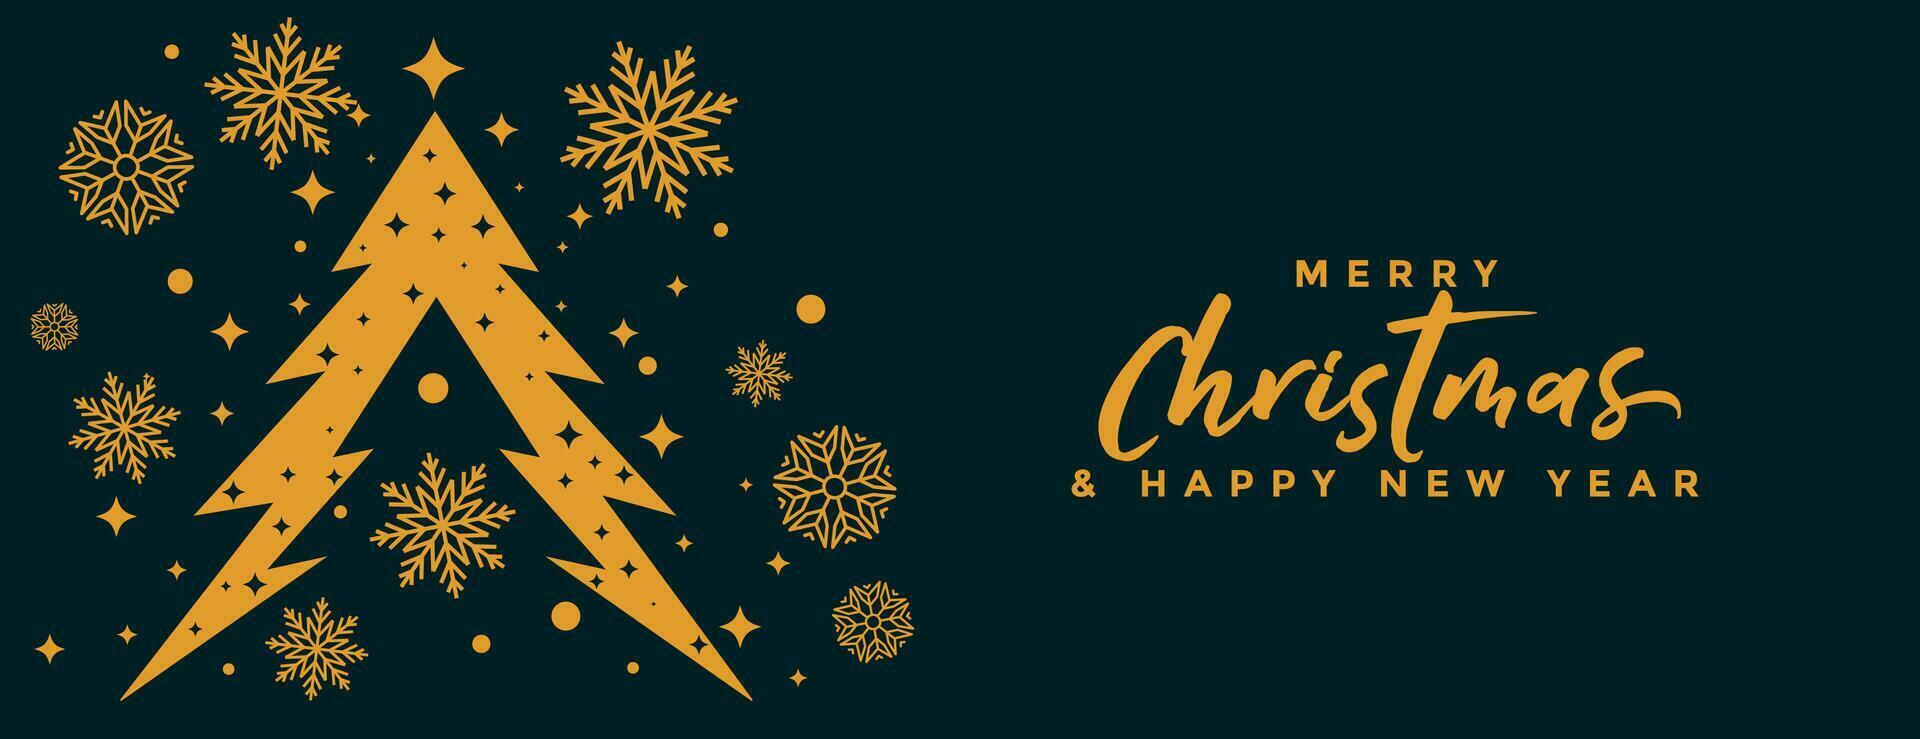 merry christmas decorative banner with snowflakes and tree vector